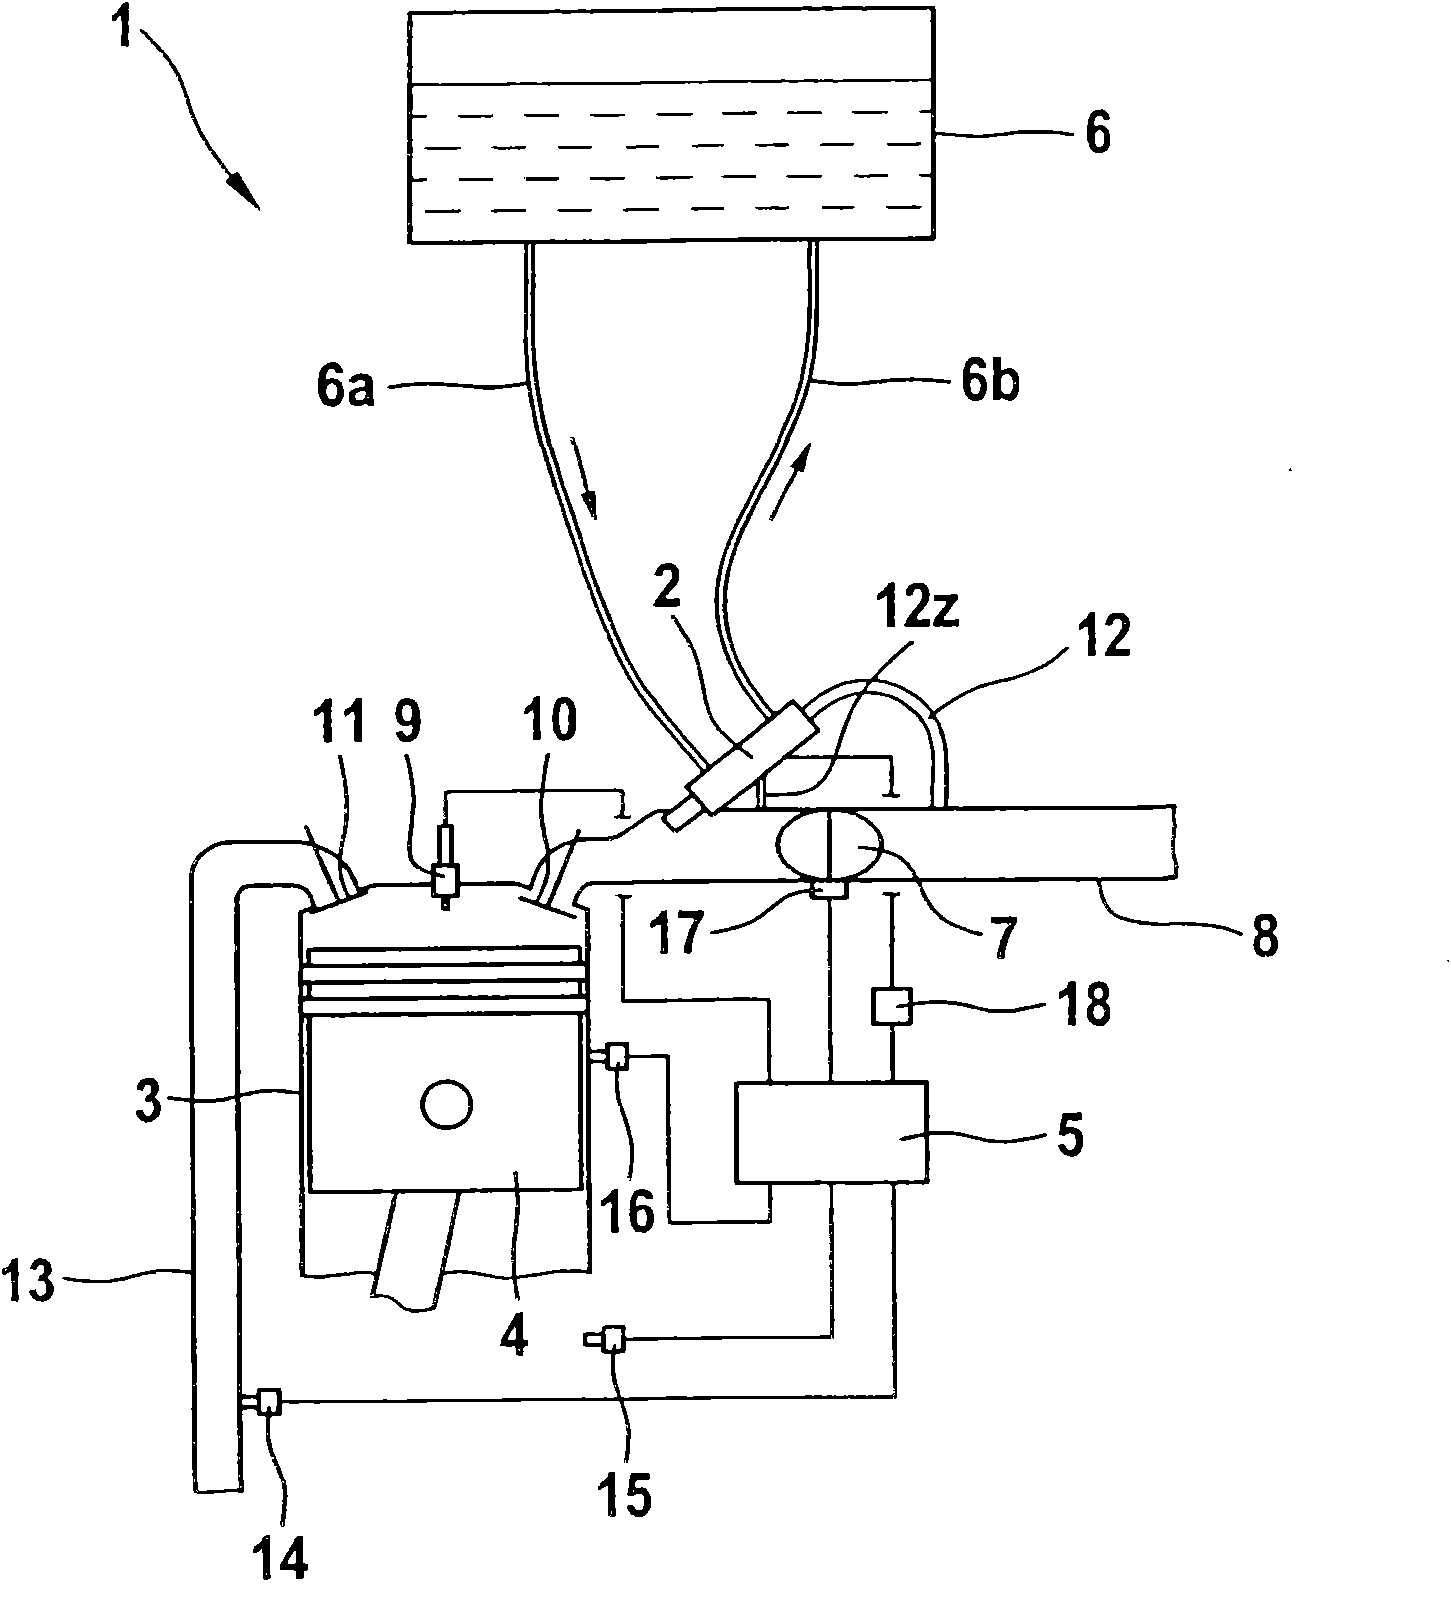 Compact type ejection apparatus provided with injector opening inward